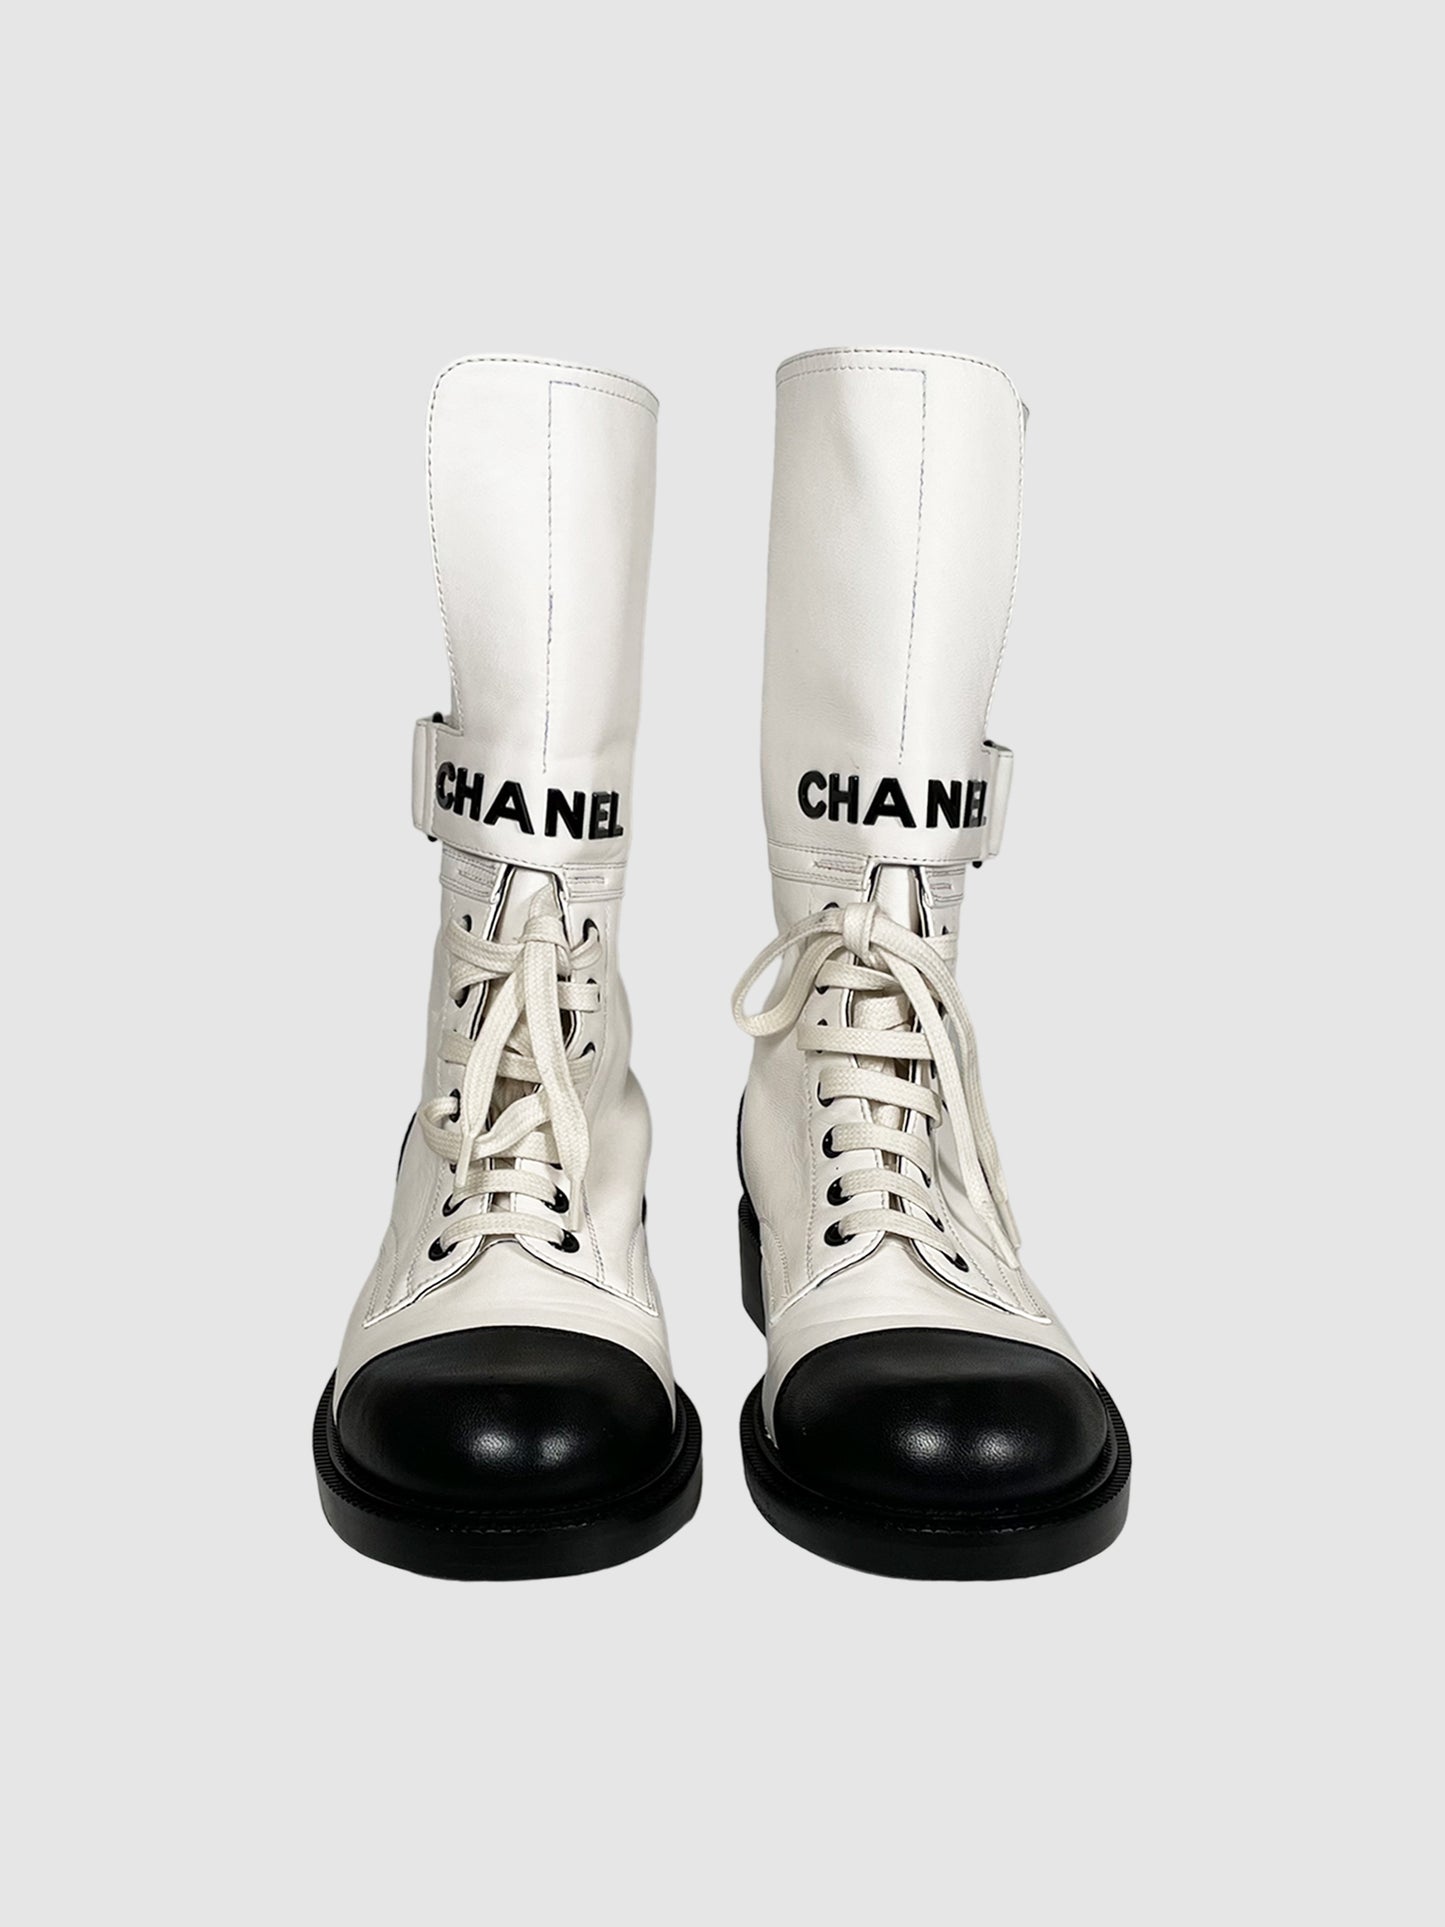 Chanel Combat Boots - Size 38.5